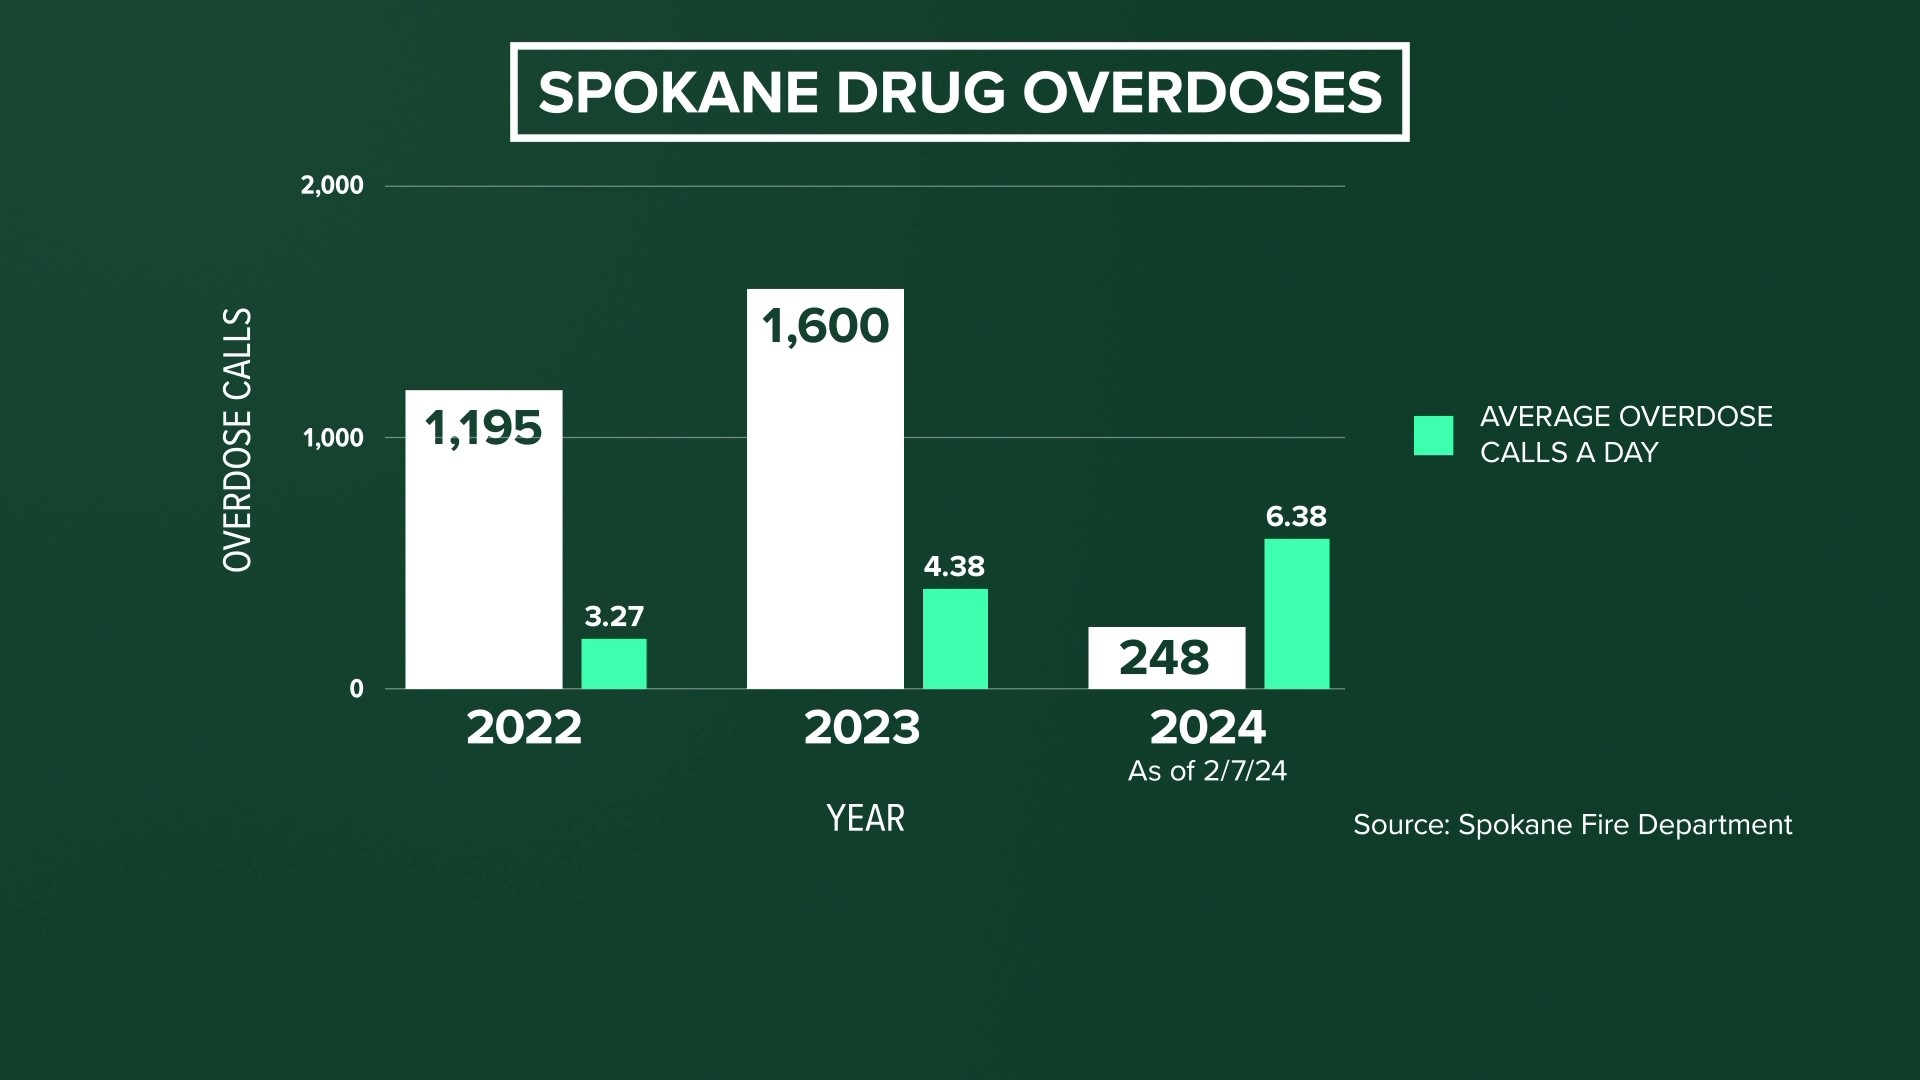 The true scope of the problem is hard to calculate based on how overdose calls are logged and under-reporting.